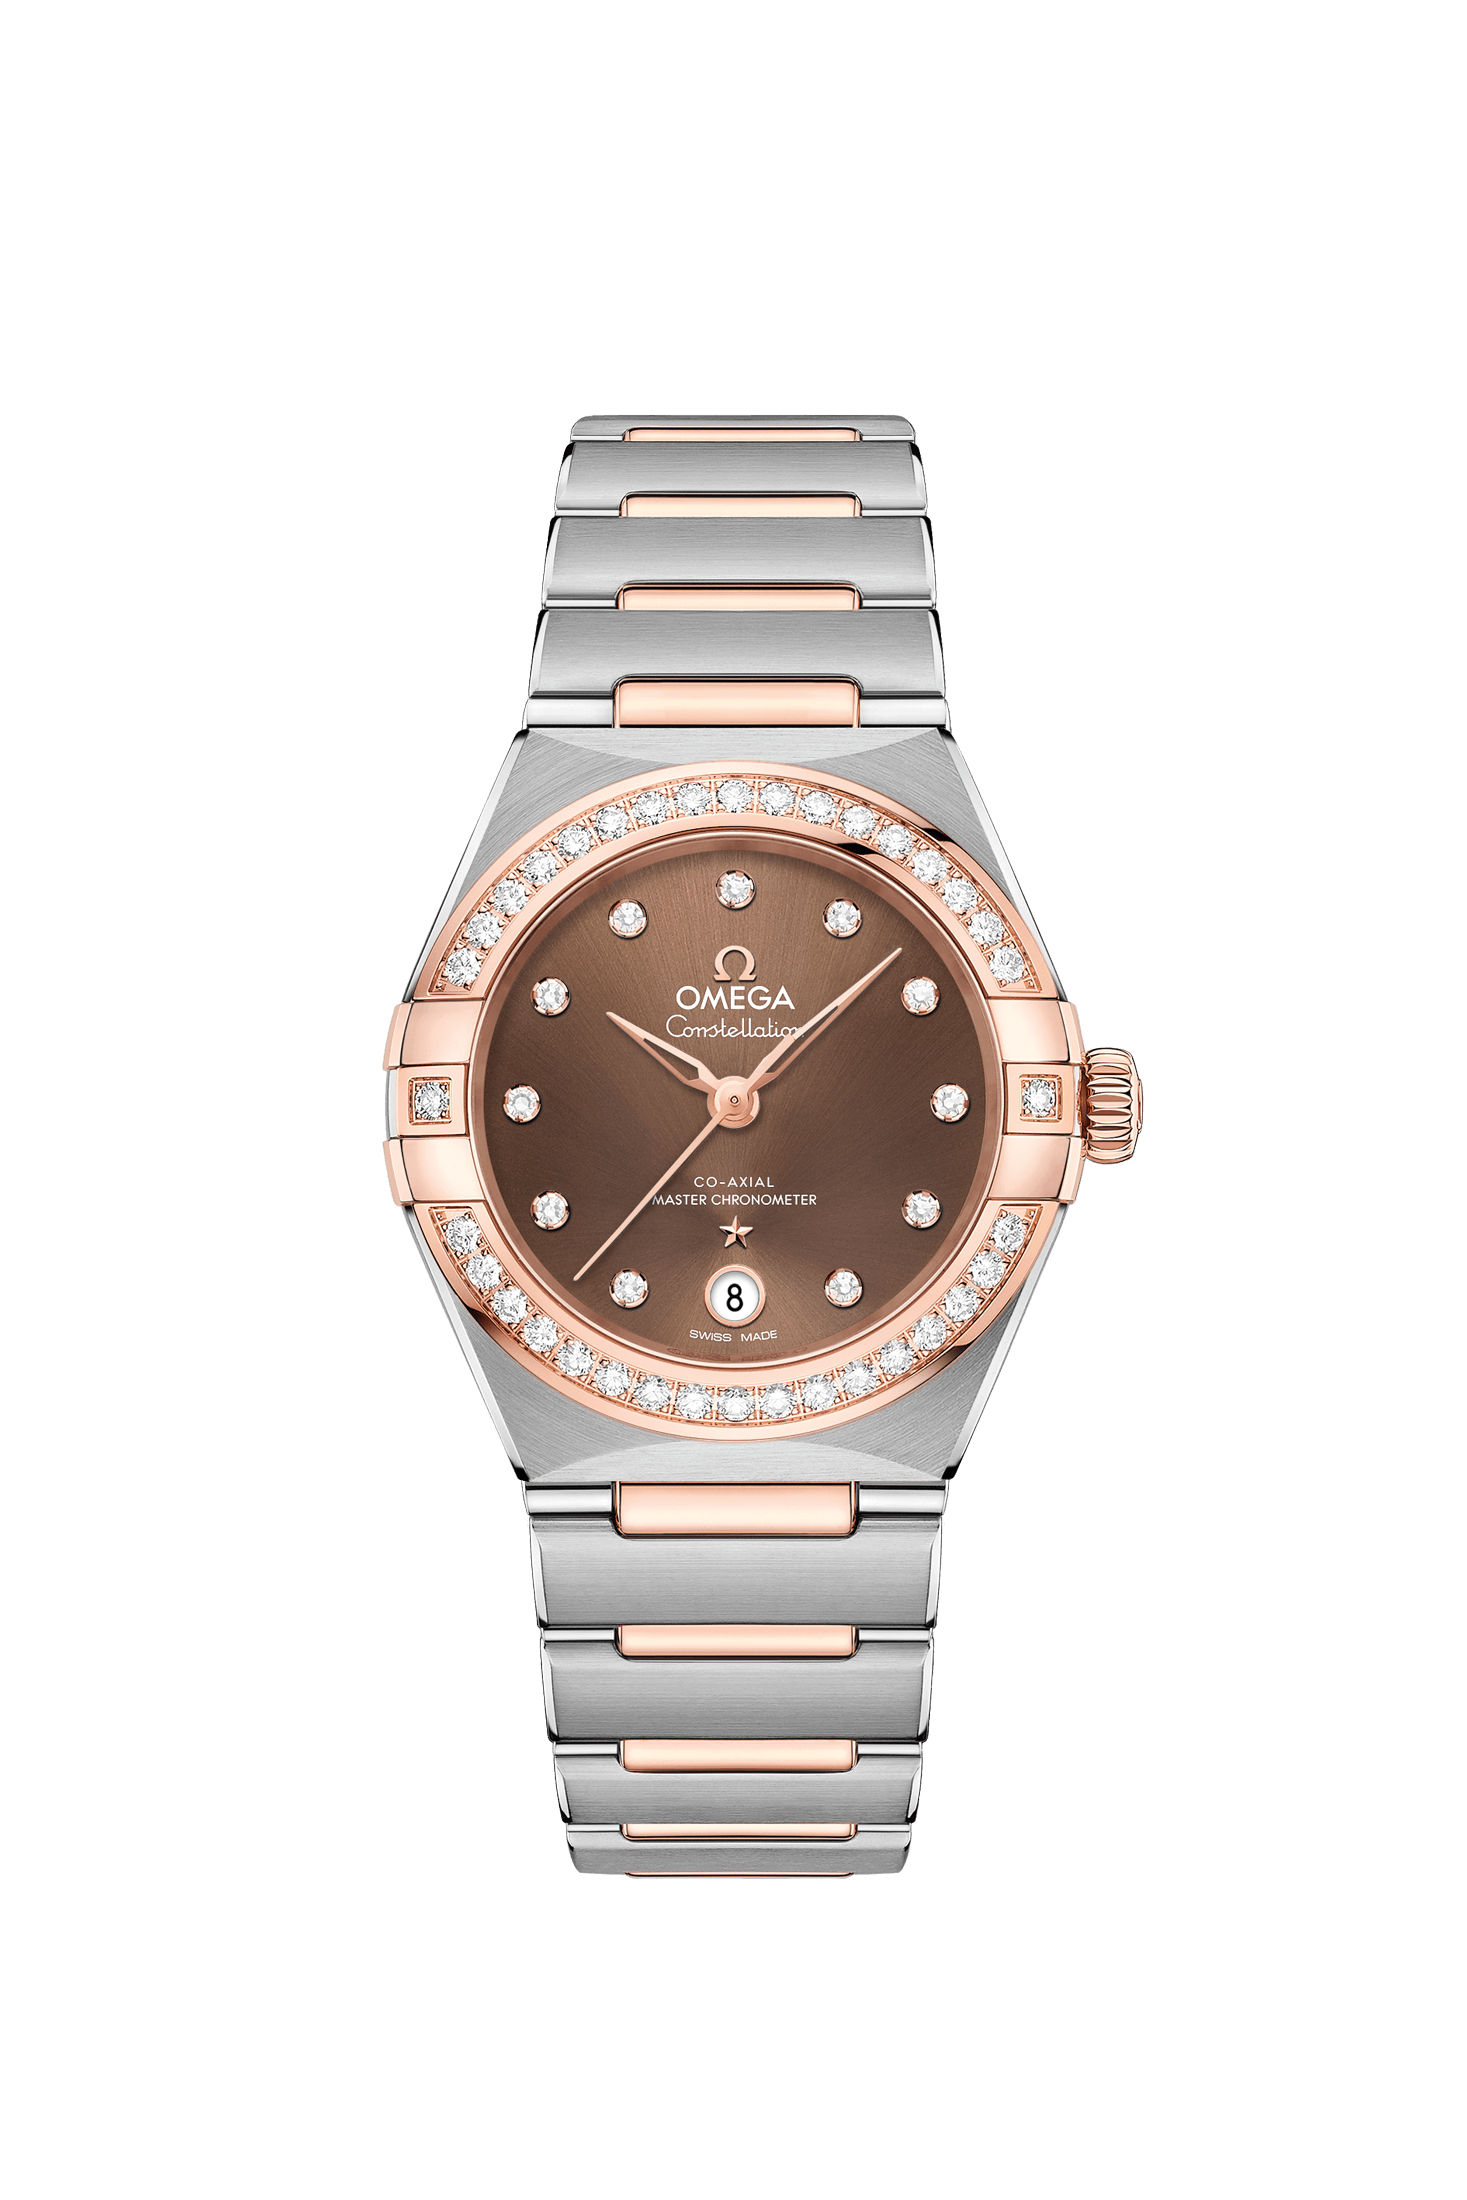 Ladies' watch  OMEGA, Constellation Co Axial Master Chronometer / 29mm, SKU: 131.25.29.20.63.001 | watchapproach.com